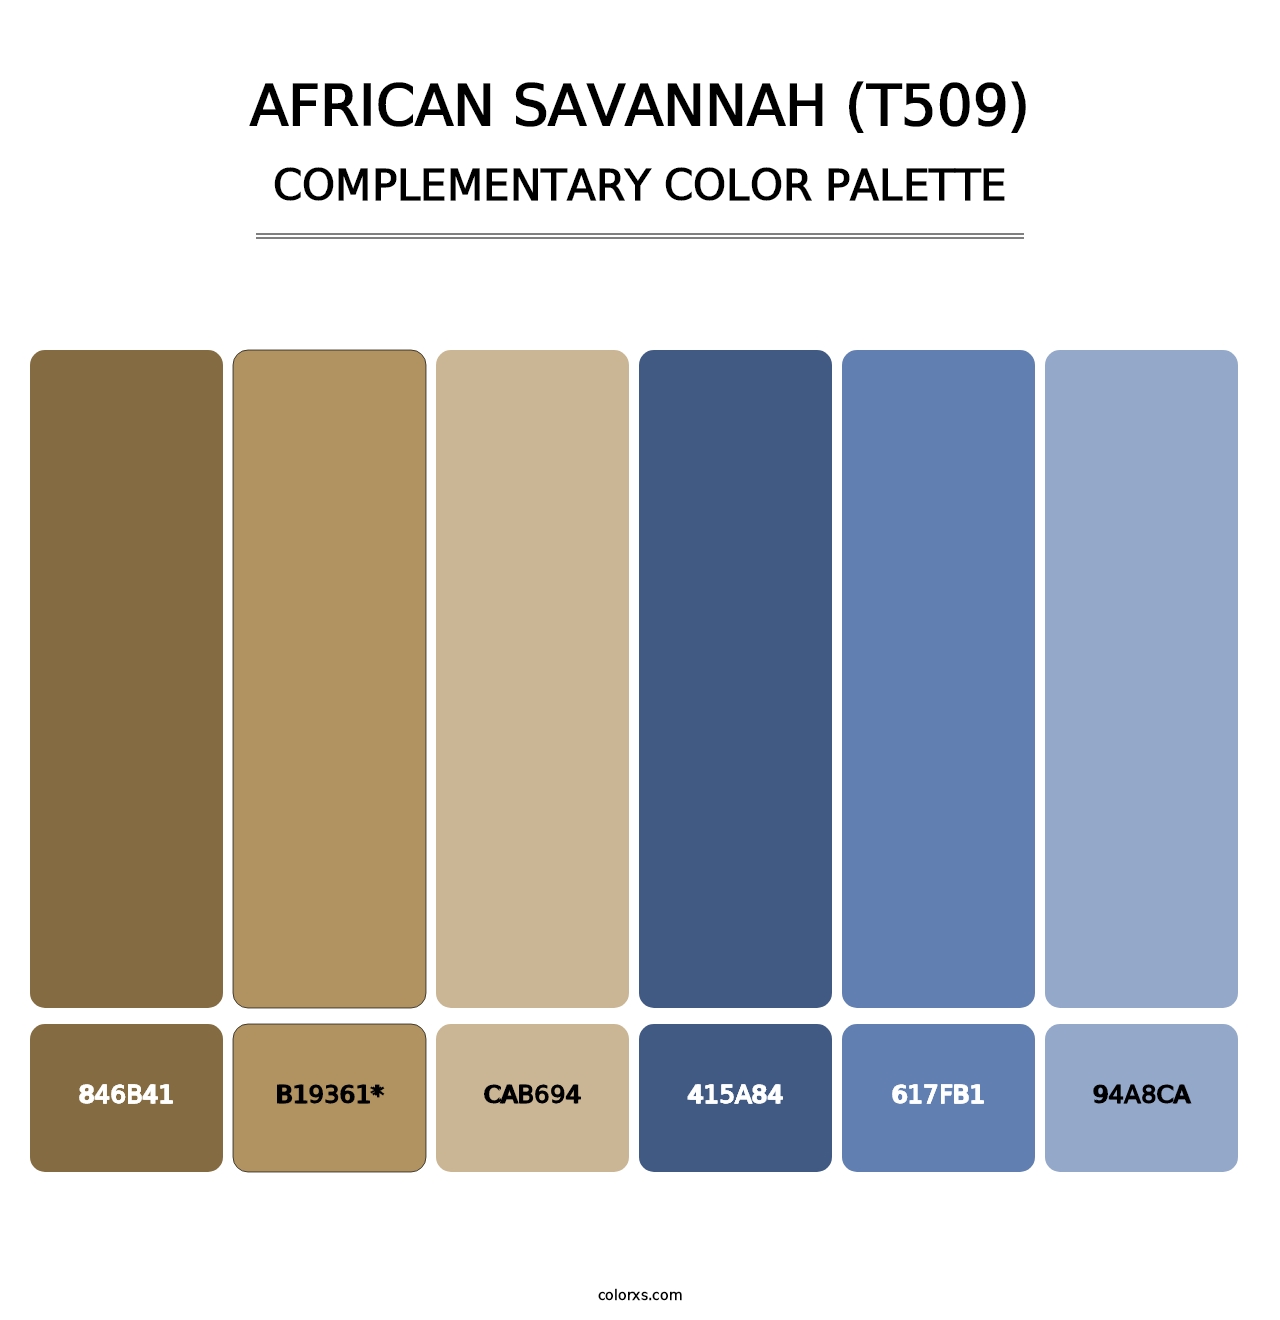 African Savannah (T509) - Complementary Color Palette